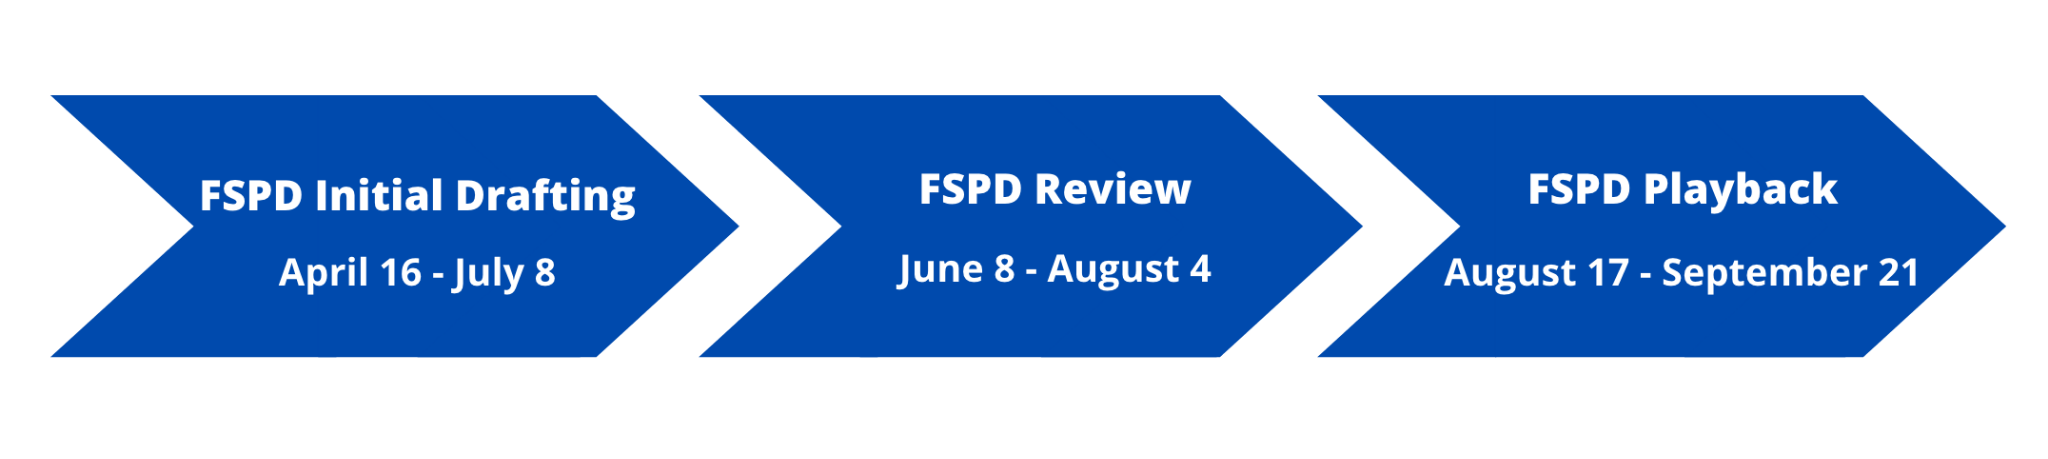 Chart showing three stages of the FSPD Process: FSPD Initial Drafting (April 16-July 8), FSPD Review (June 8-August 4), and FSPD Playback (August 17-September 21)